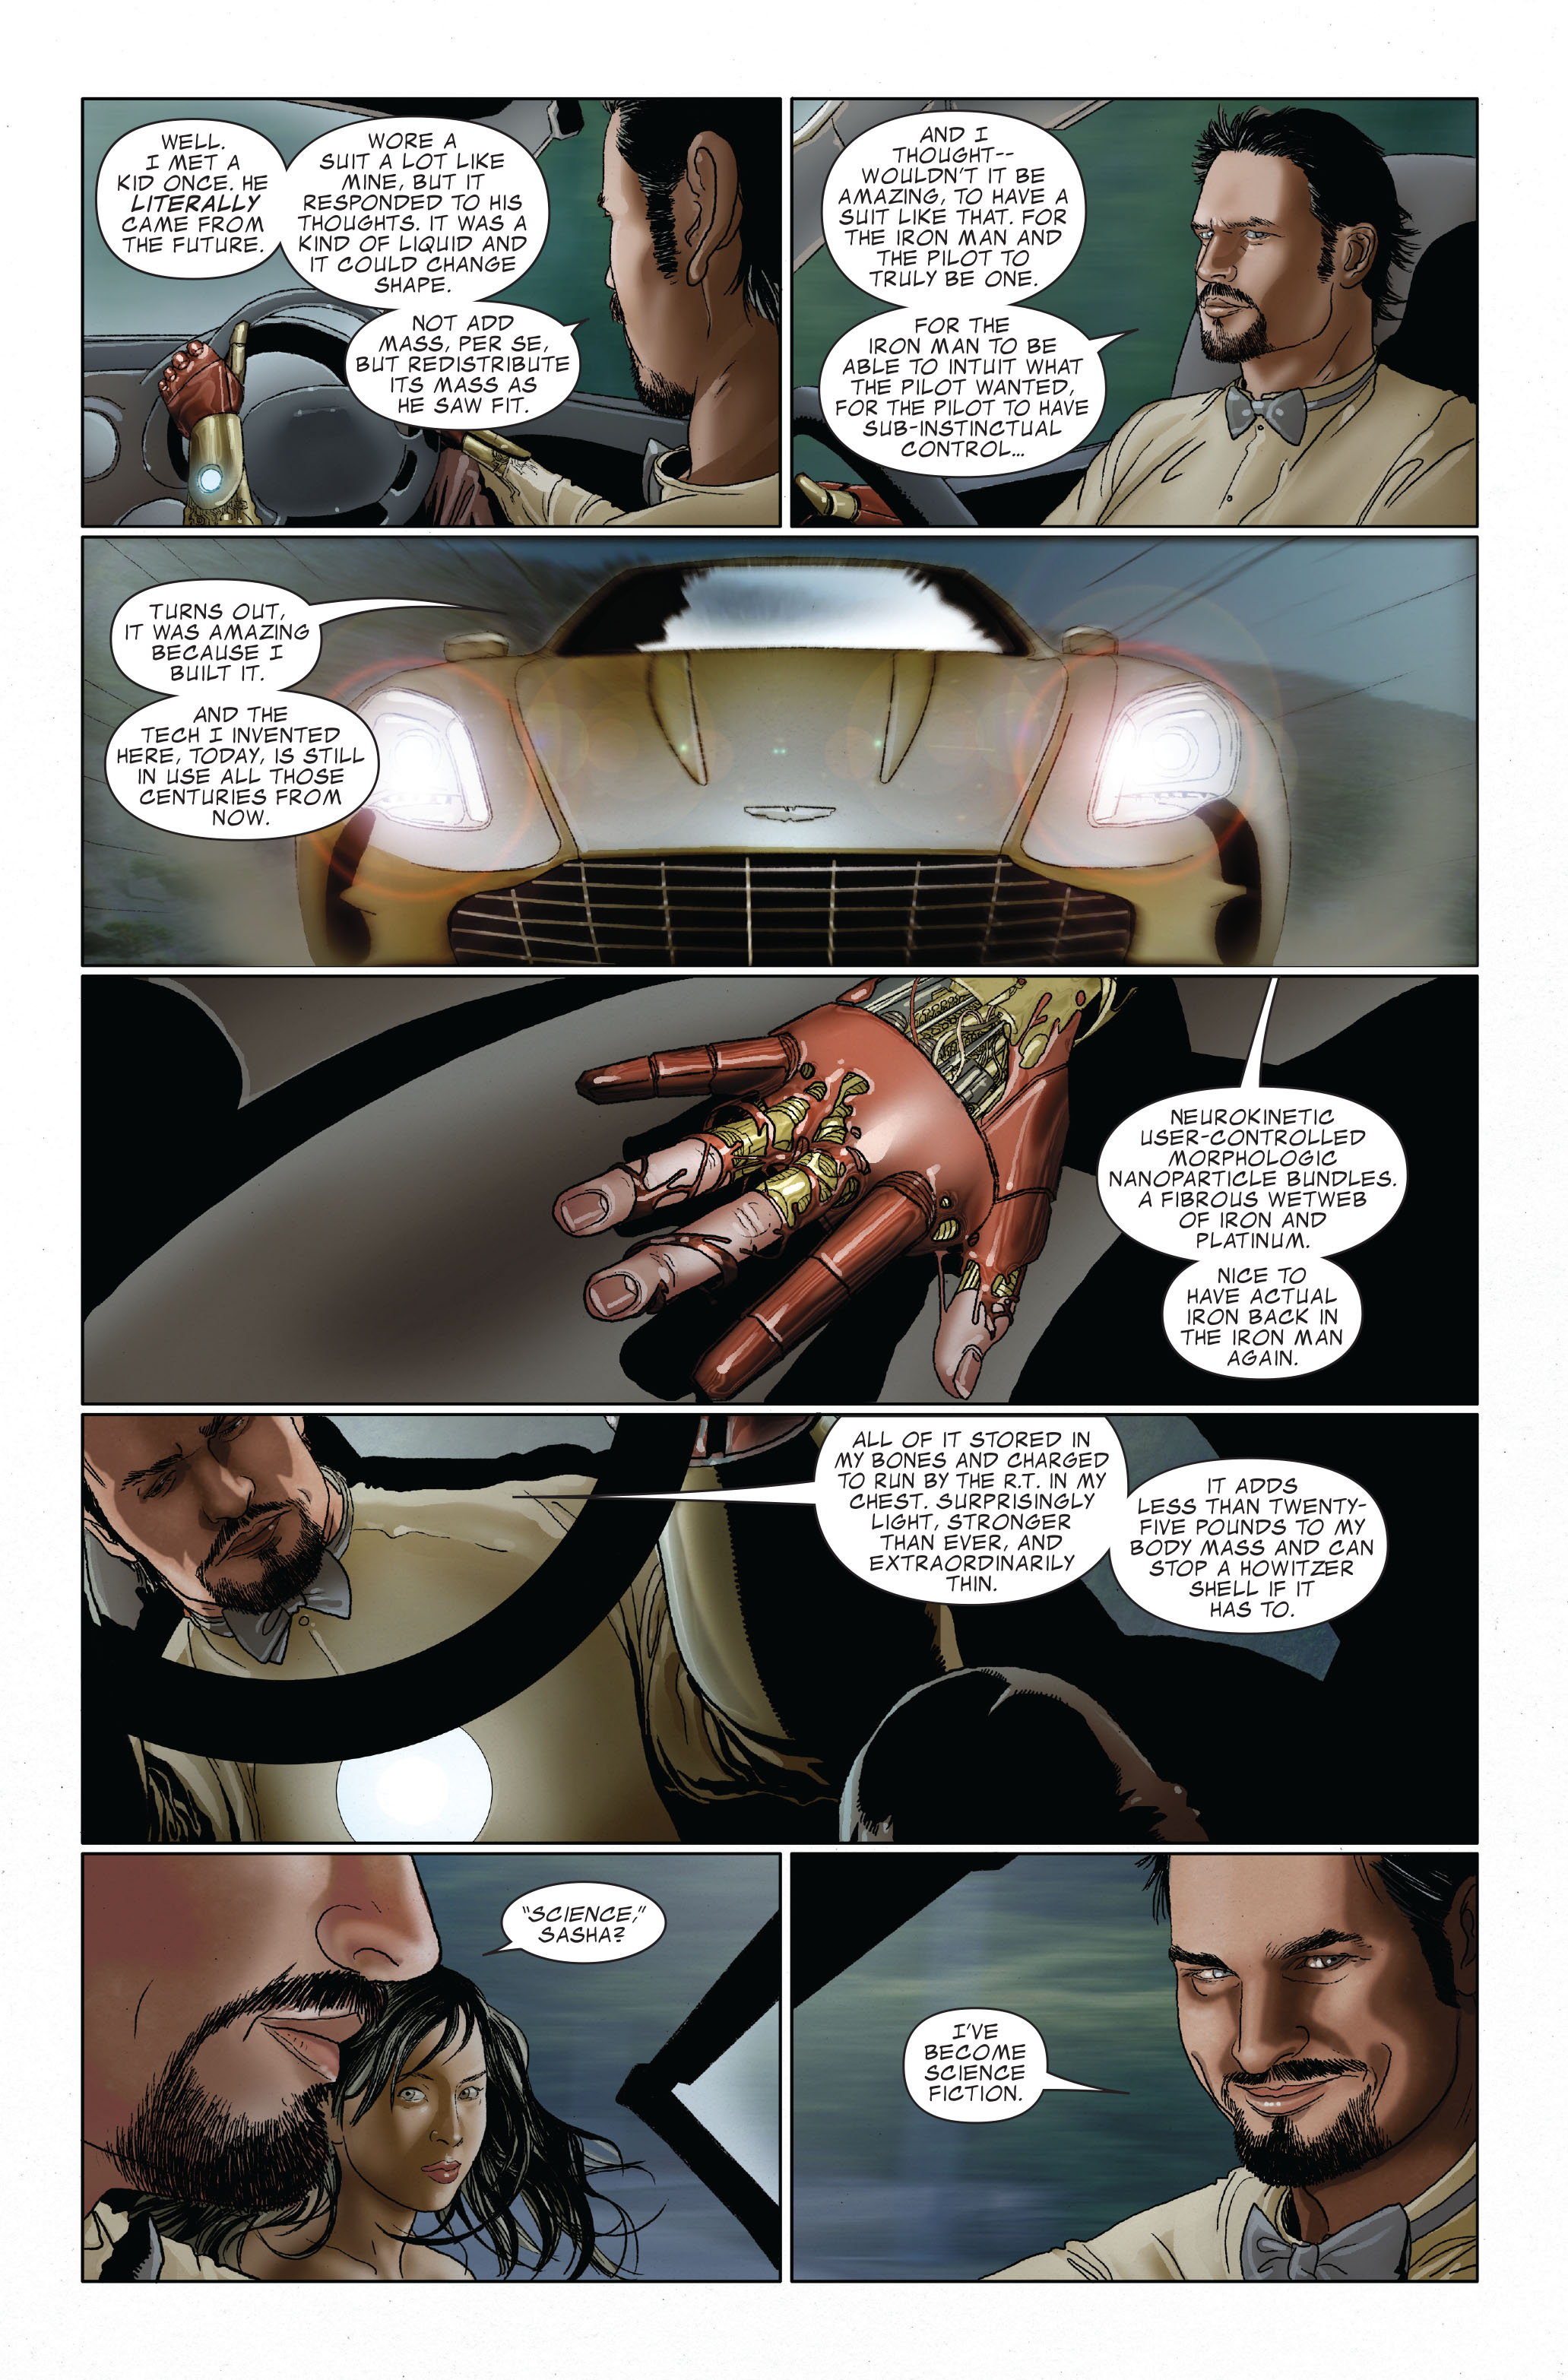 Invincible Iron Man (2008) 30 Page 8